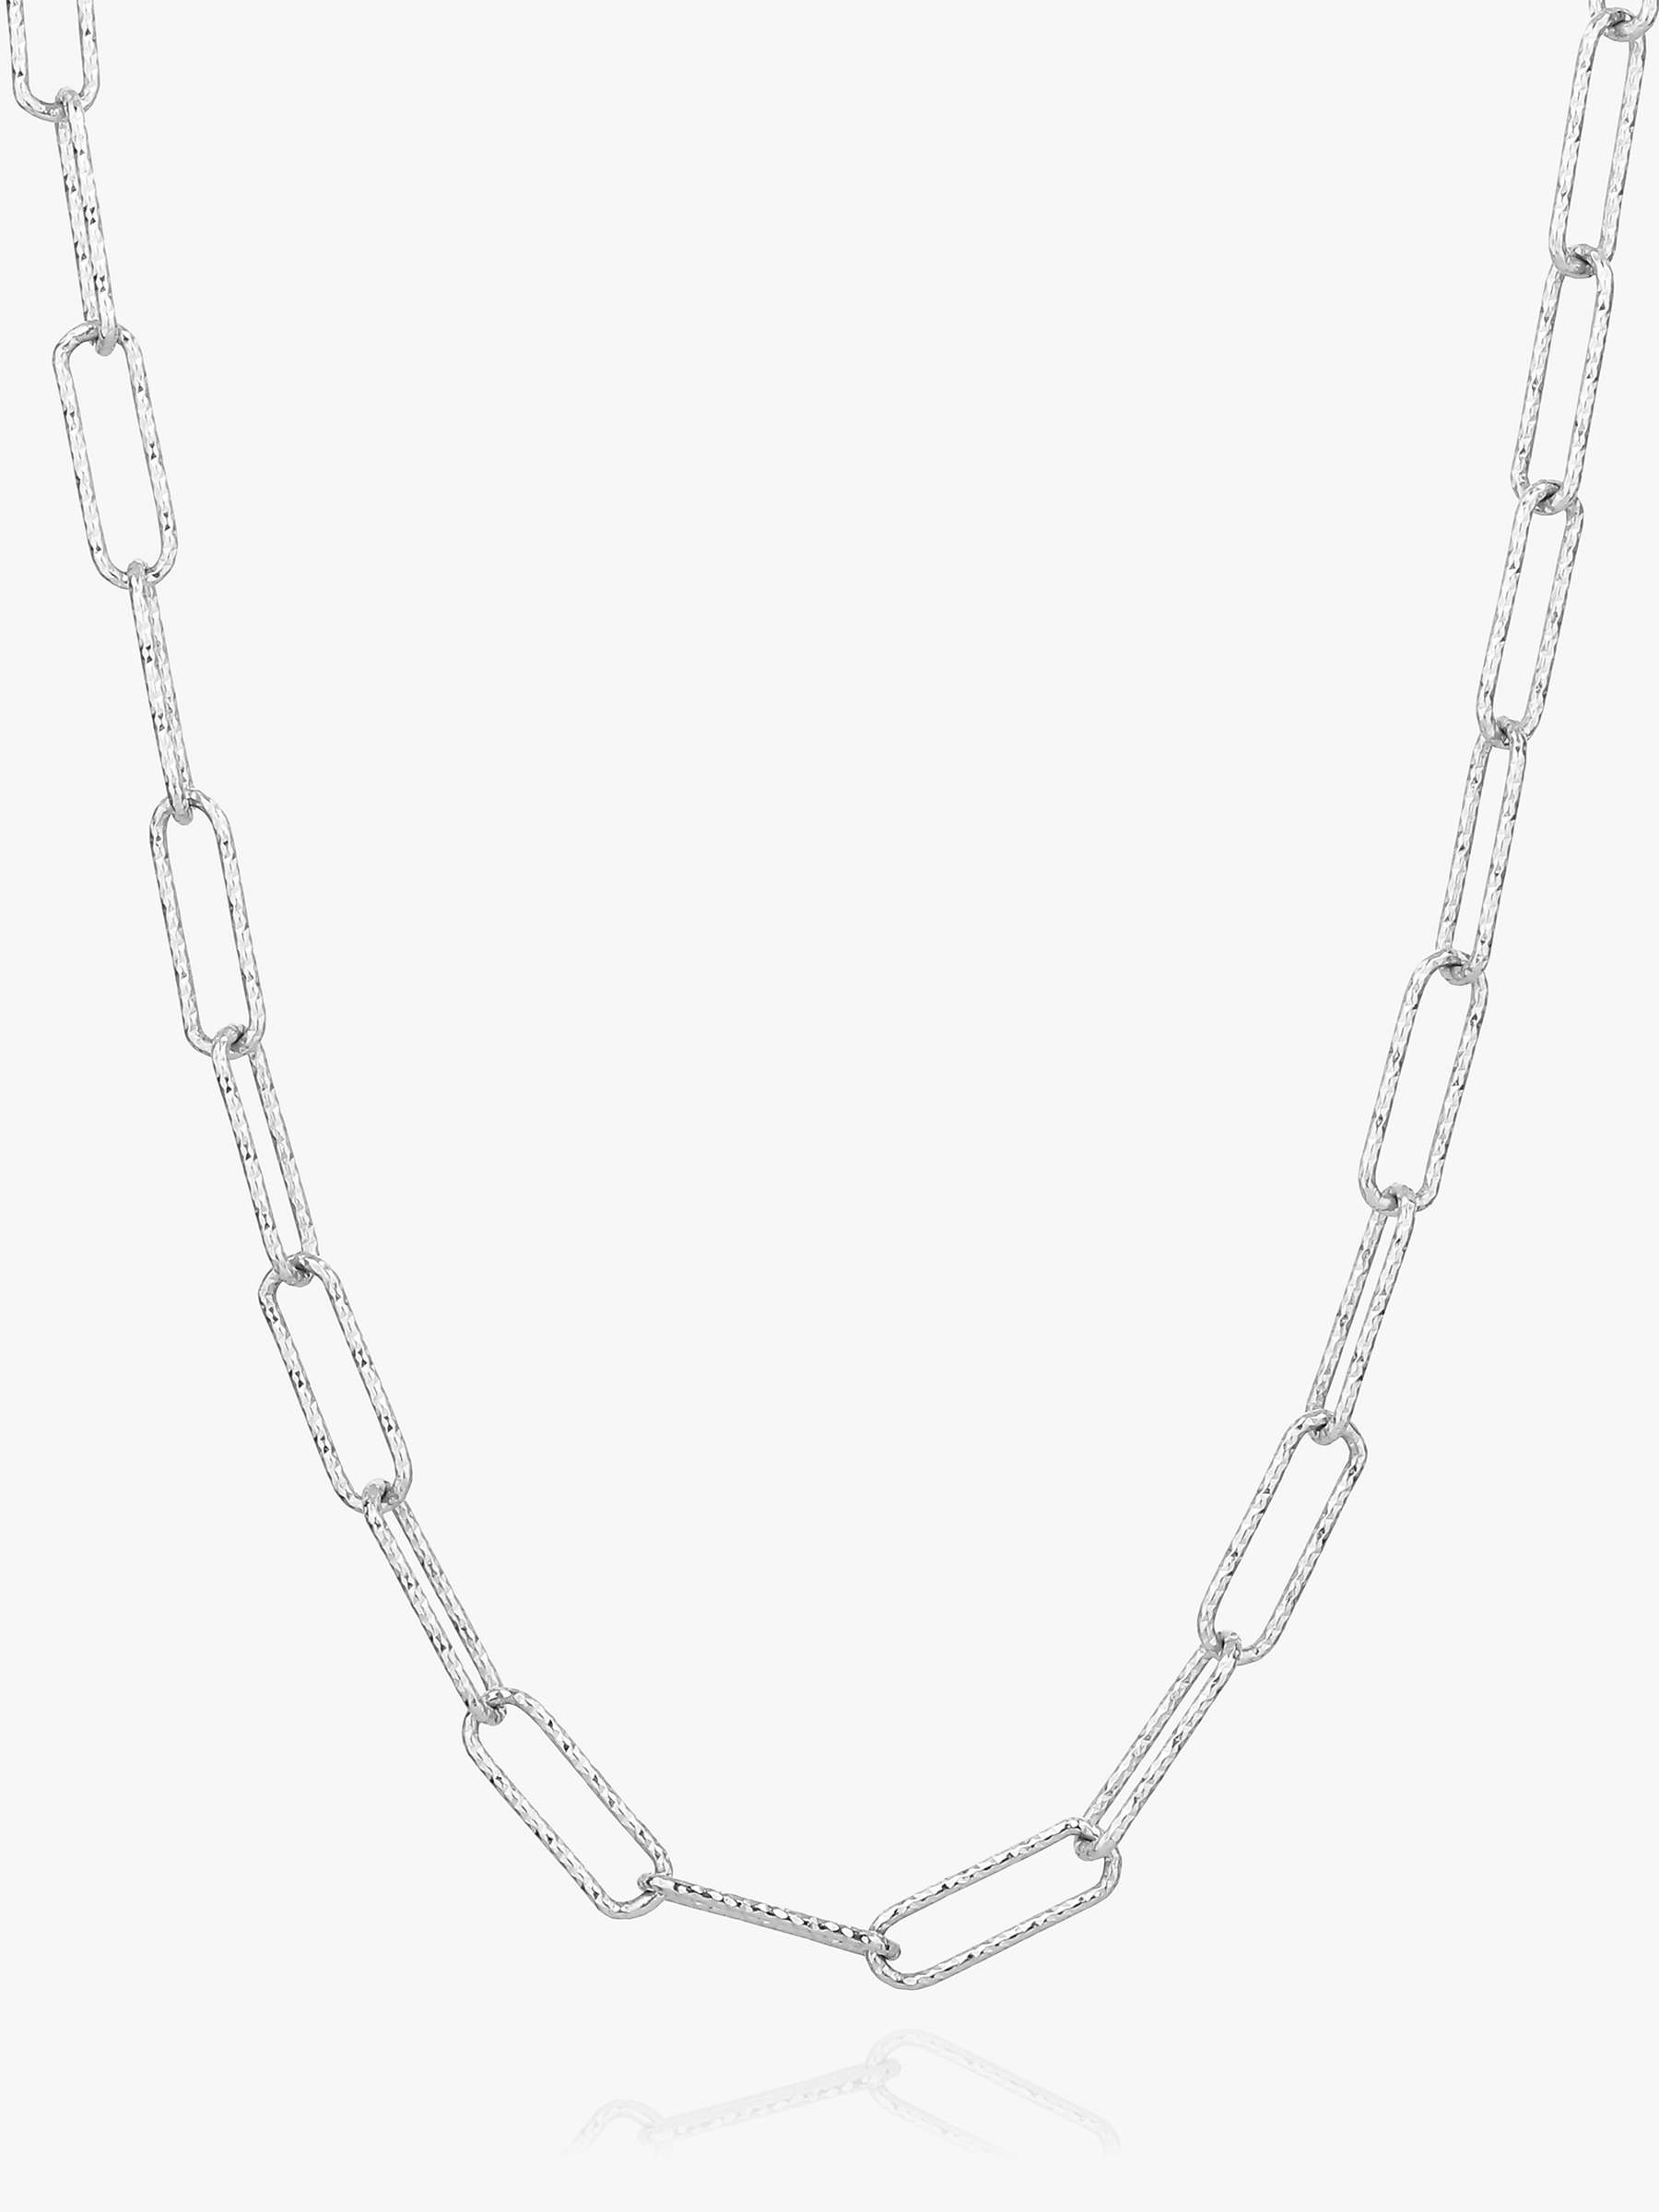 Buy Sif Jakobs Jewellery Textured Paperclip Link Chain Necklace, Silver Online at johnlewis.com